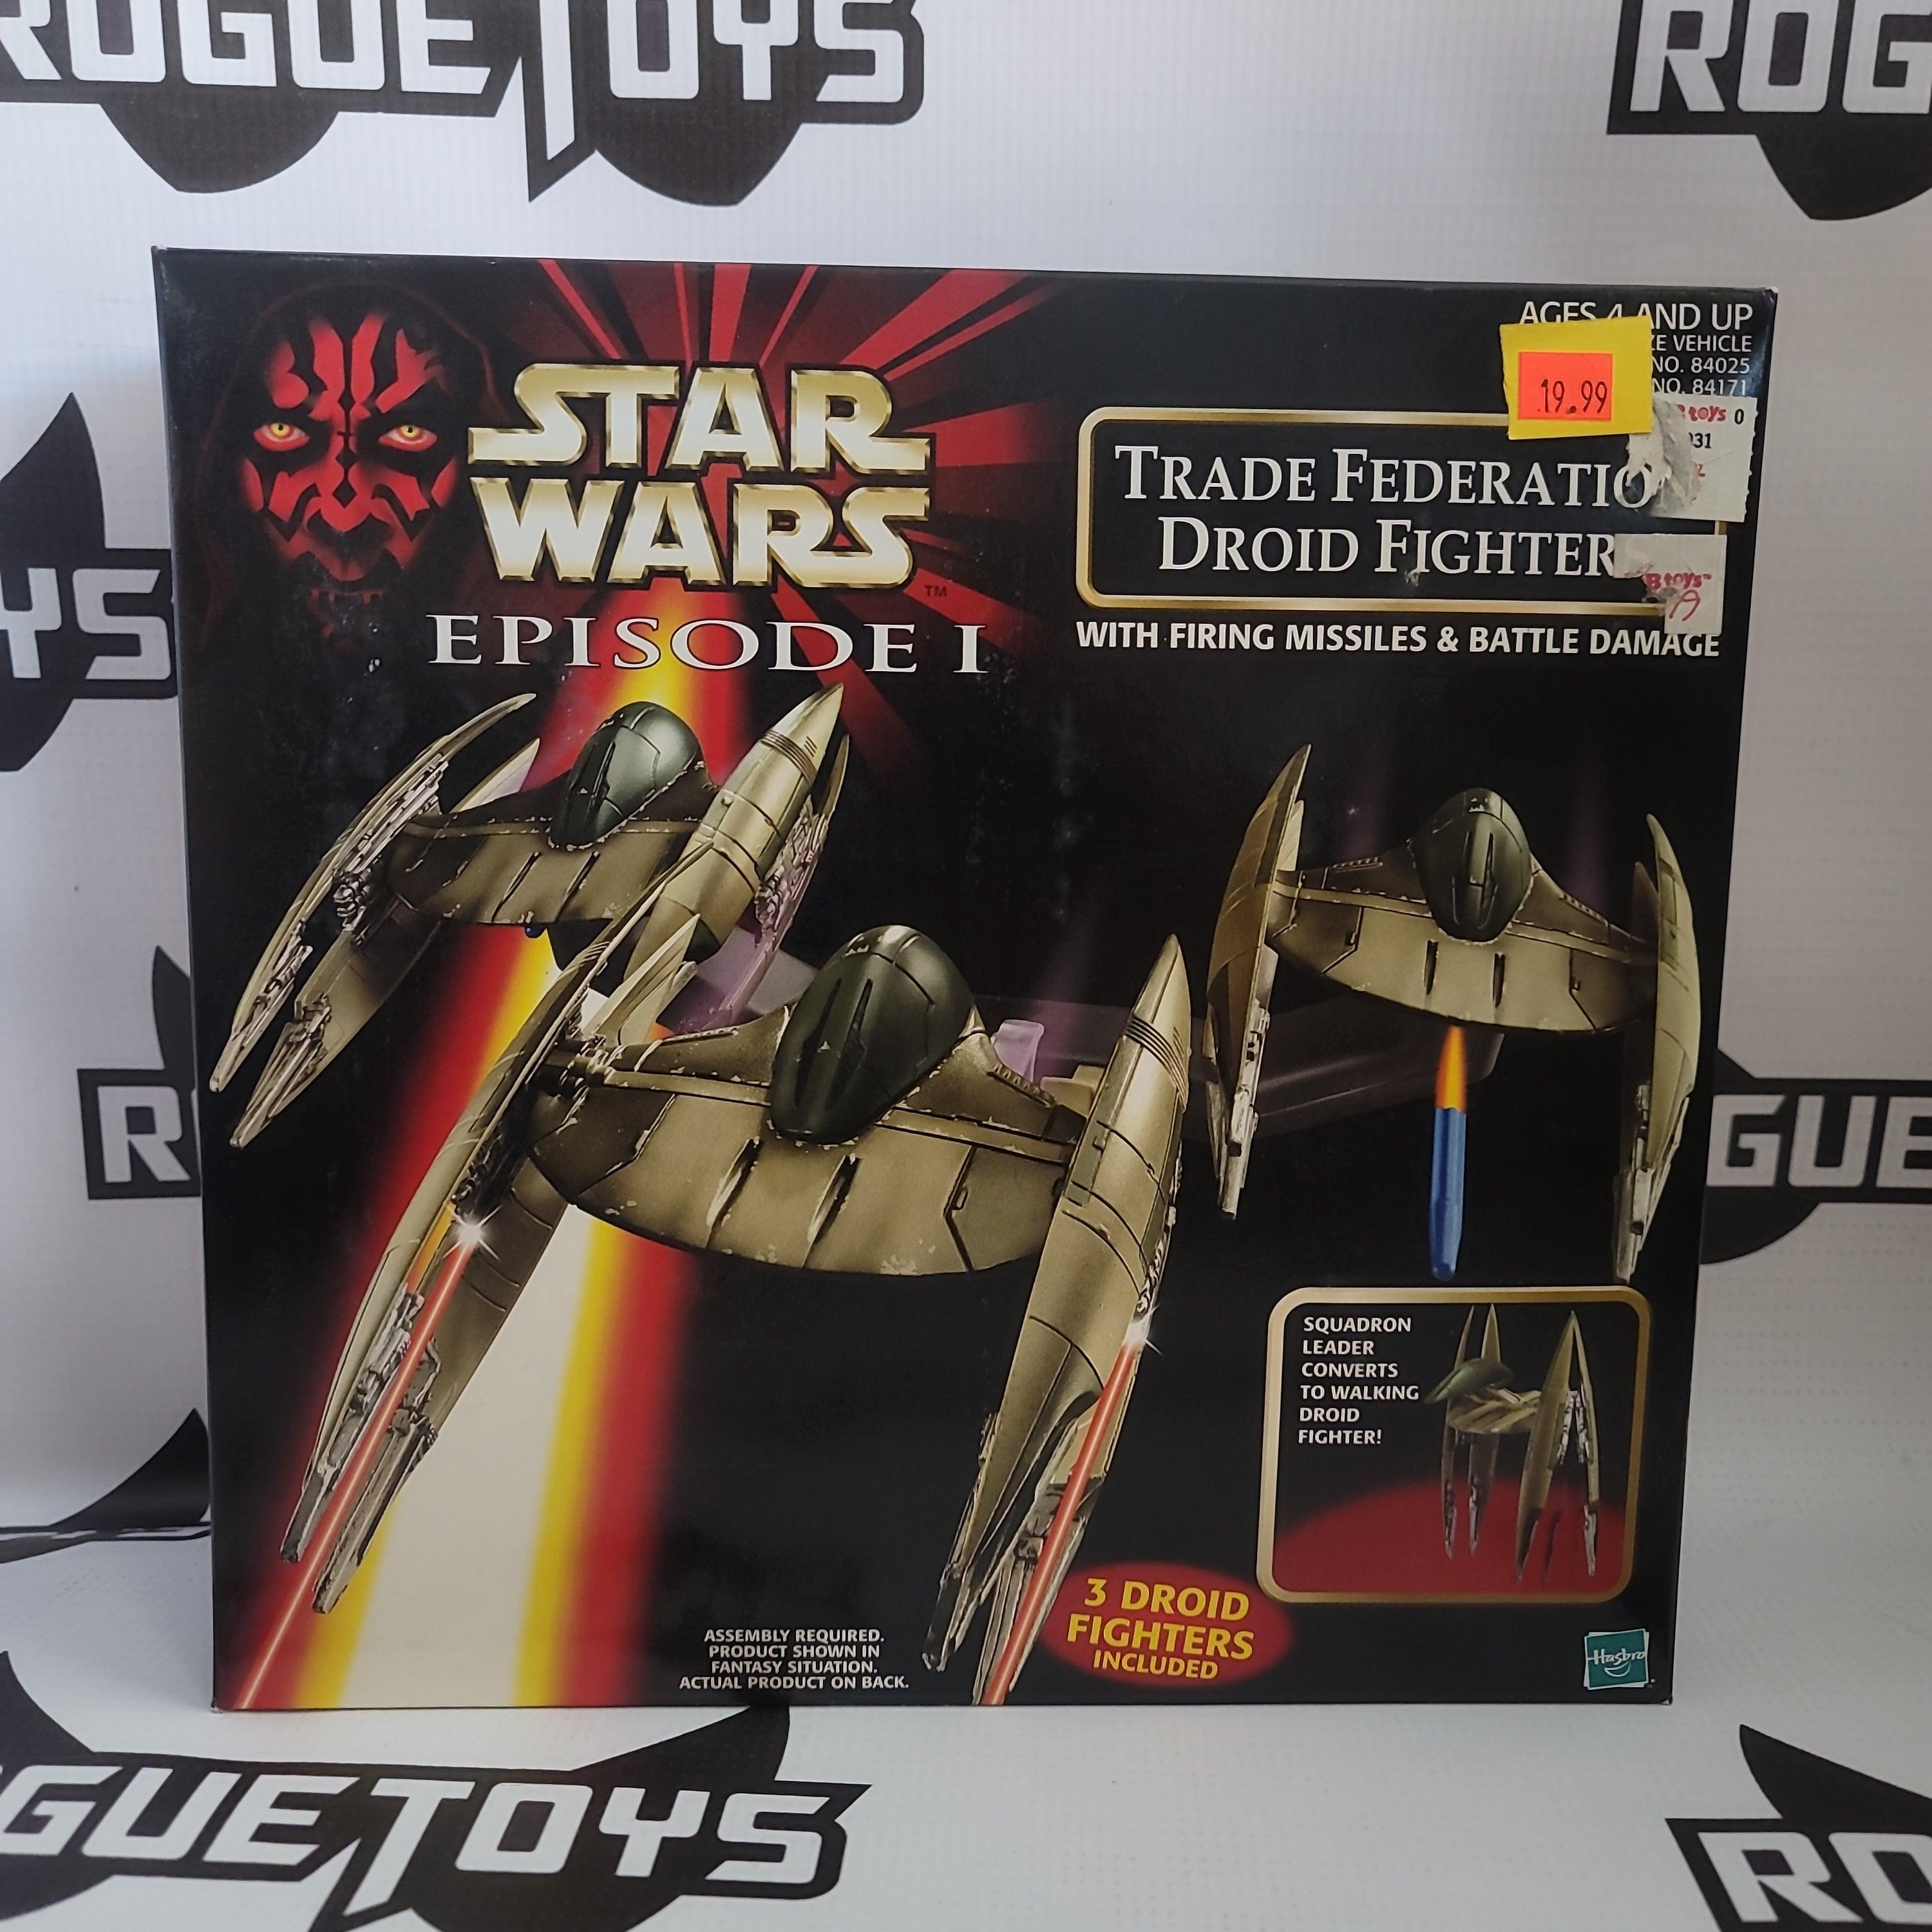 Hasbro Star Wars episode 1 Trade federation Droid fighter - Rogue Toys